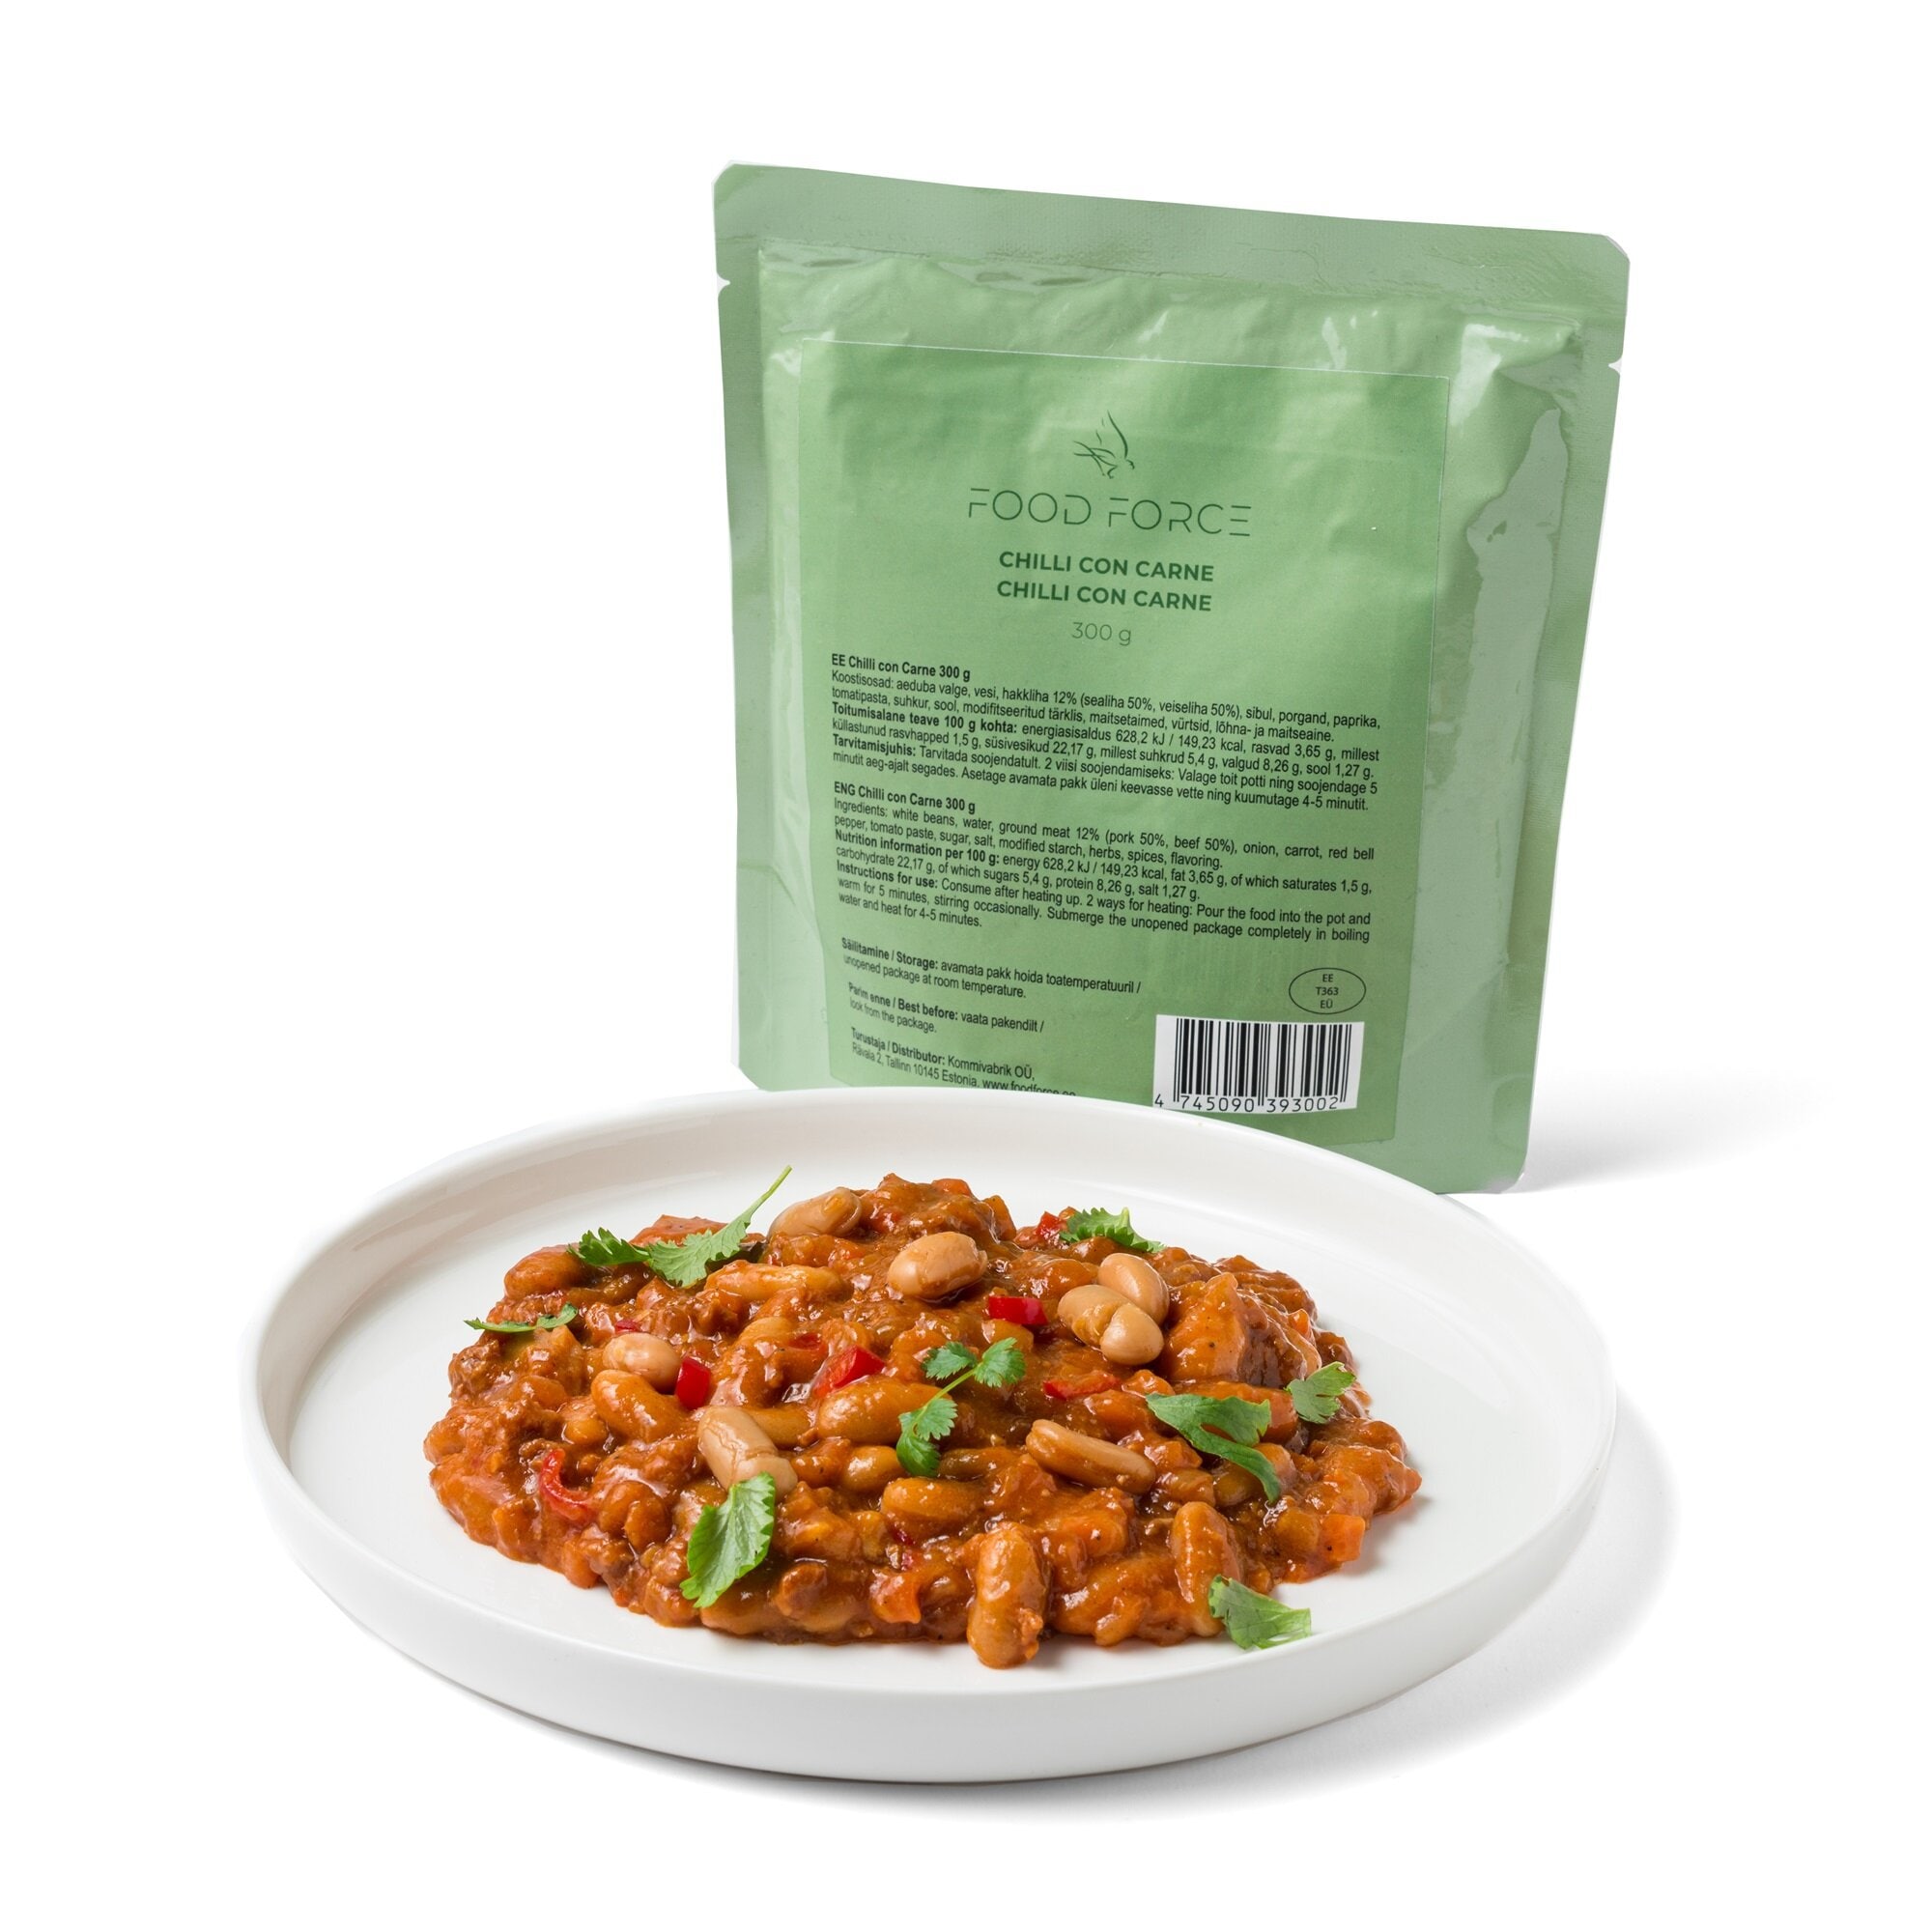 Food Force Chili con carne - Wet Pouch